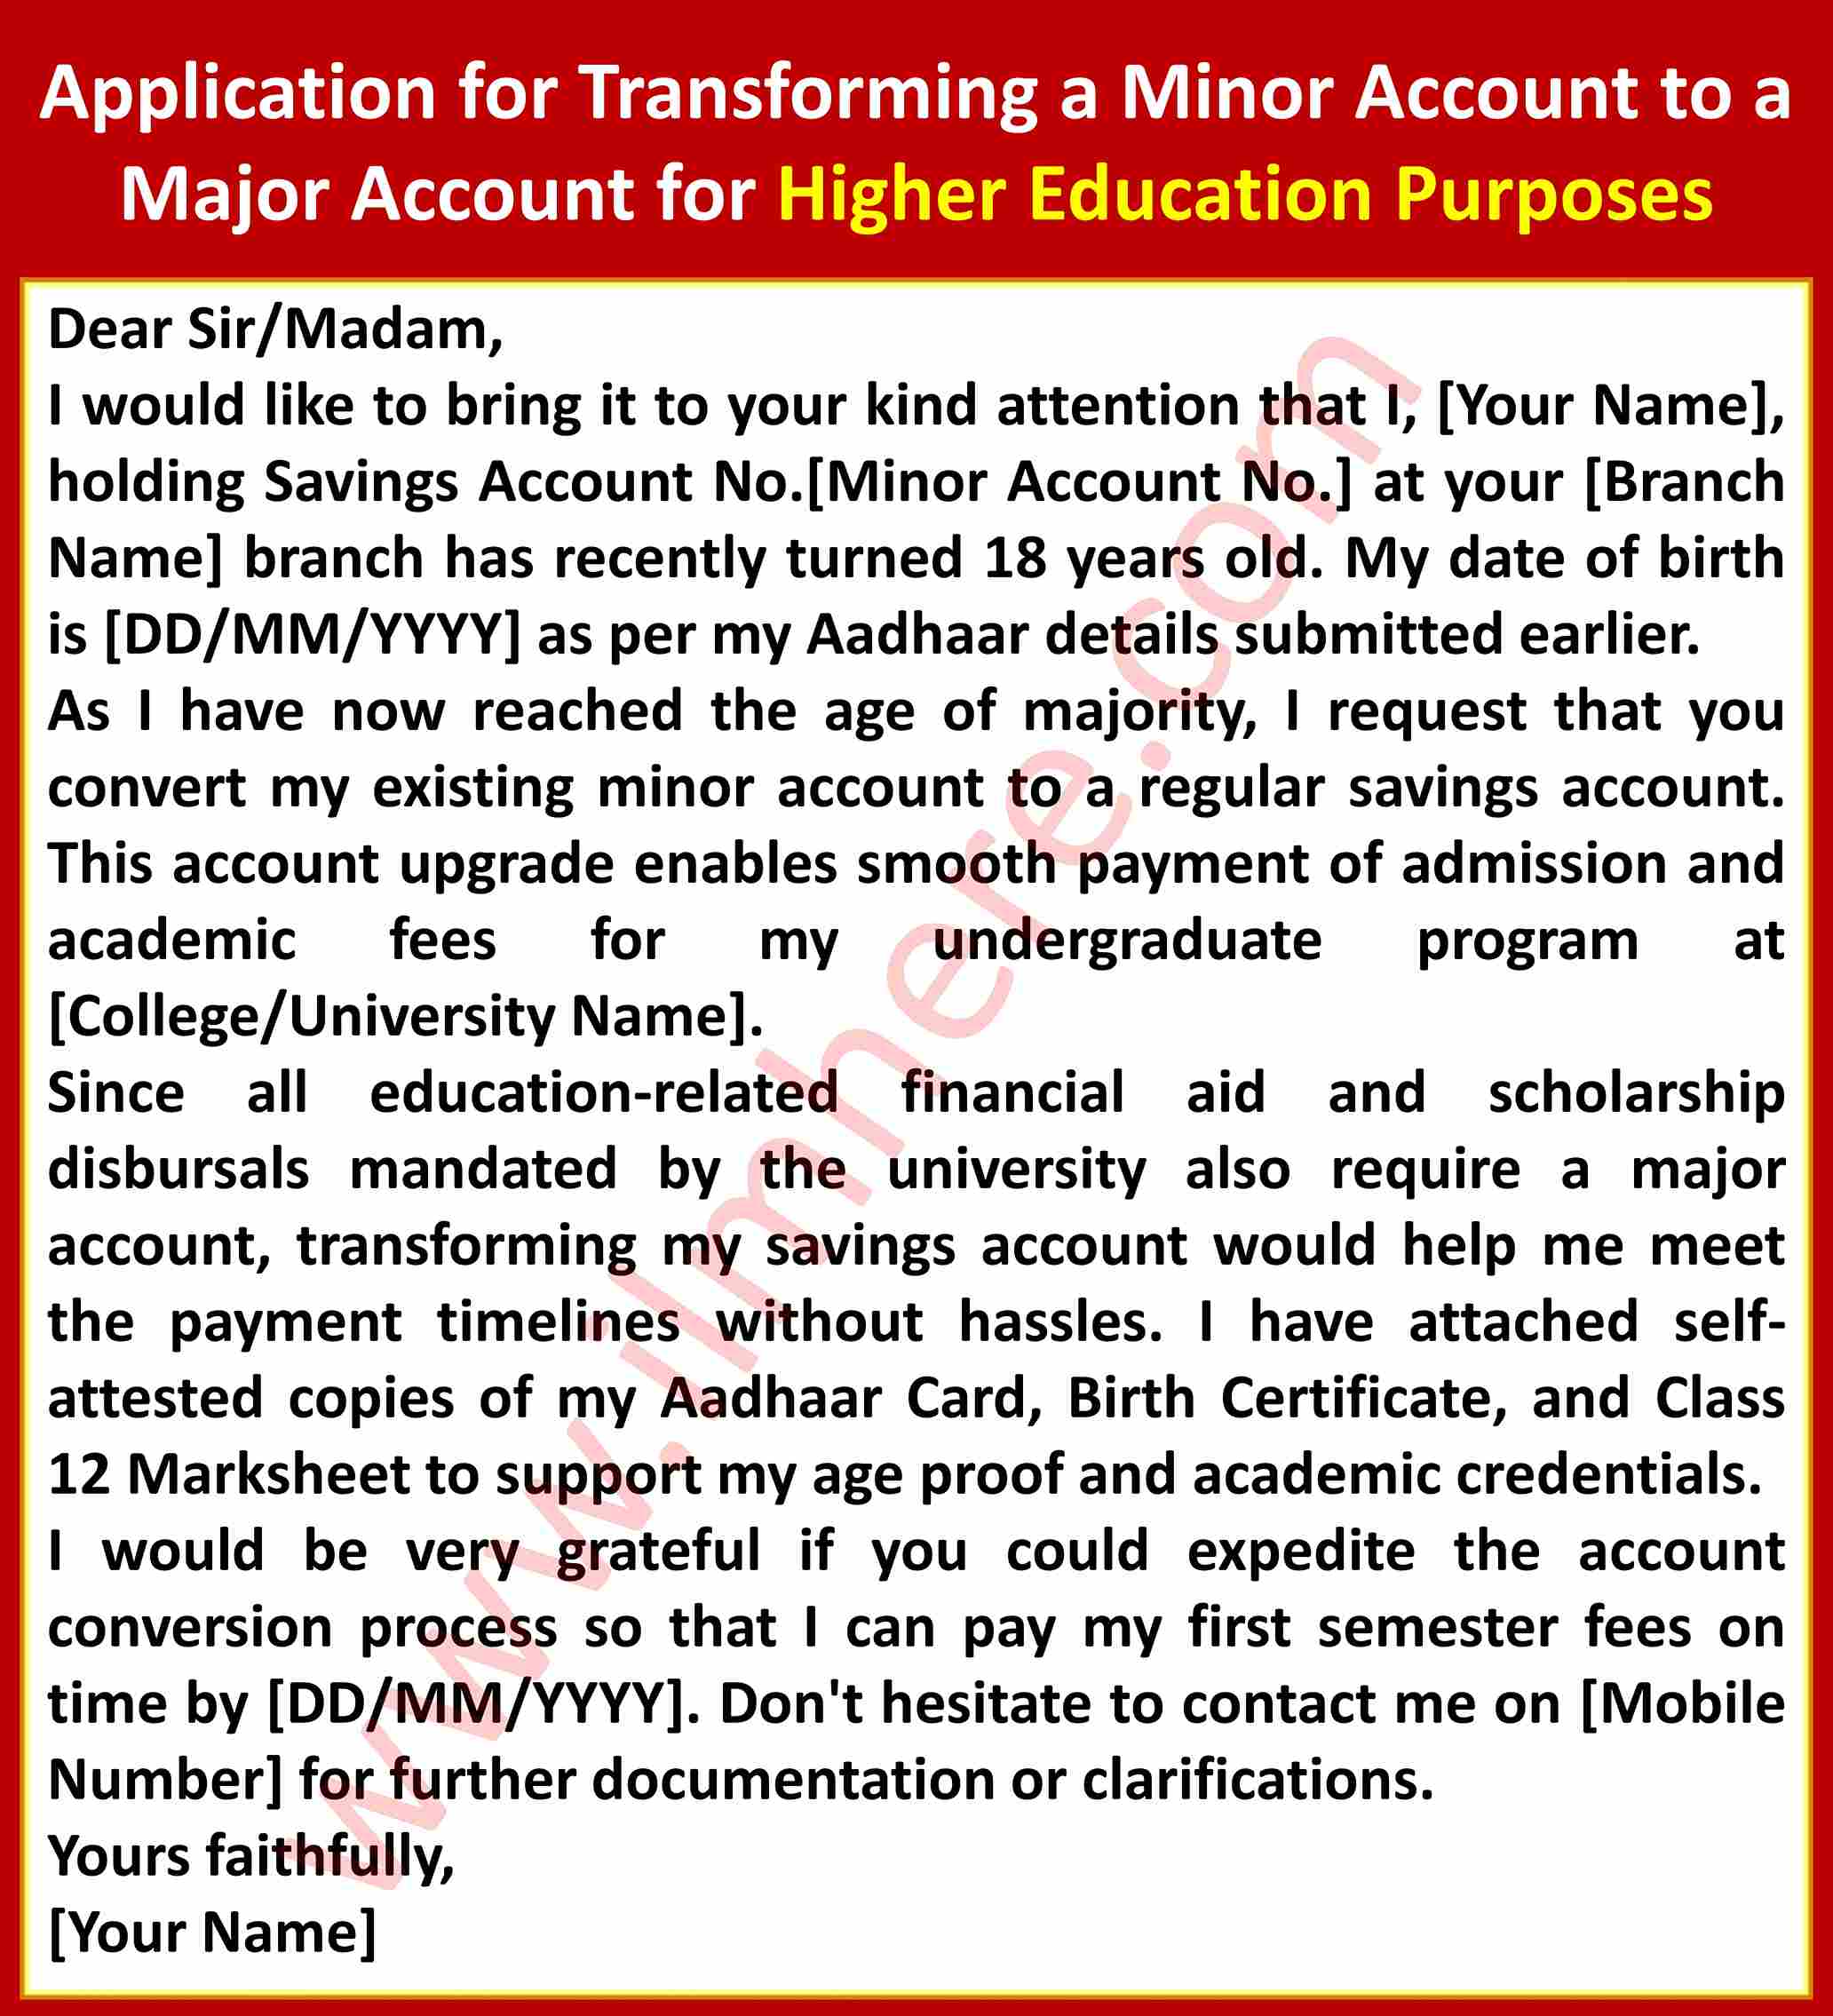 Application for Transforming a Minor Account to a Major Account for Higher Education Purposes